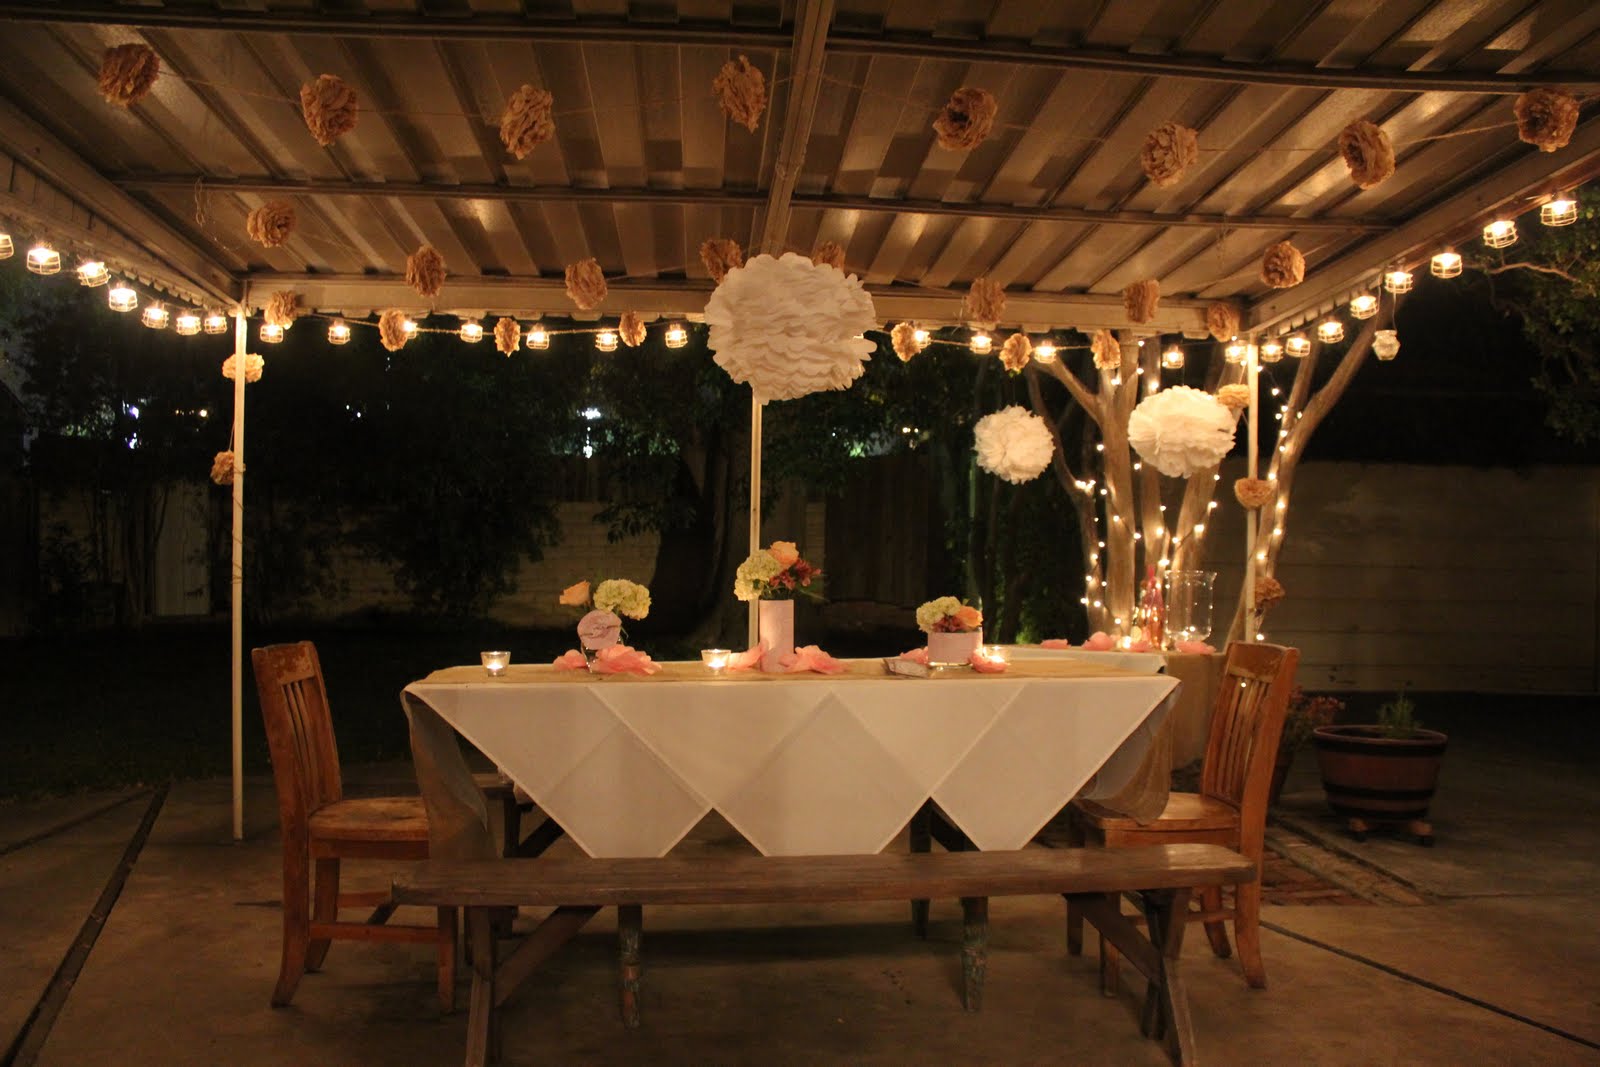  Elegant  Party  Table Decorating  Ideas  Photograph Outdoor Ch